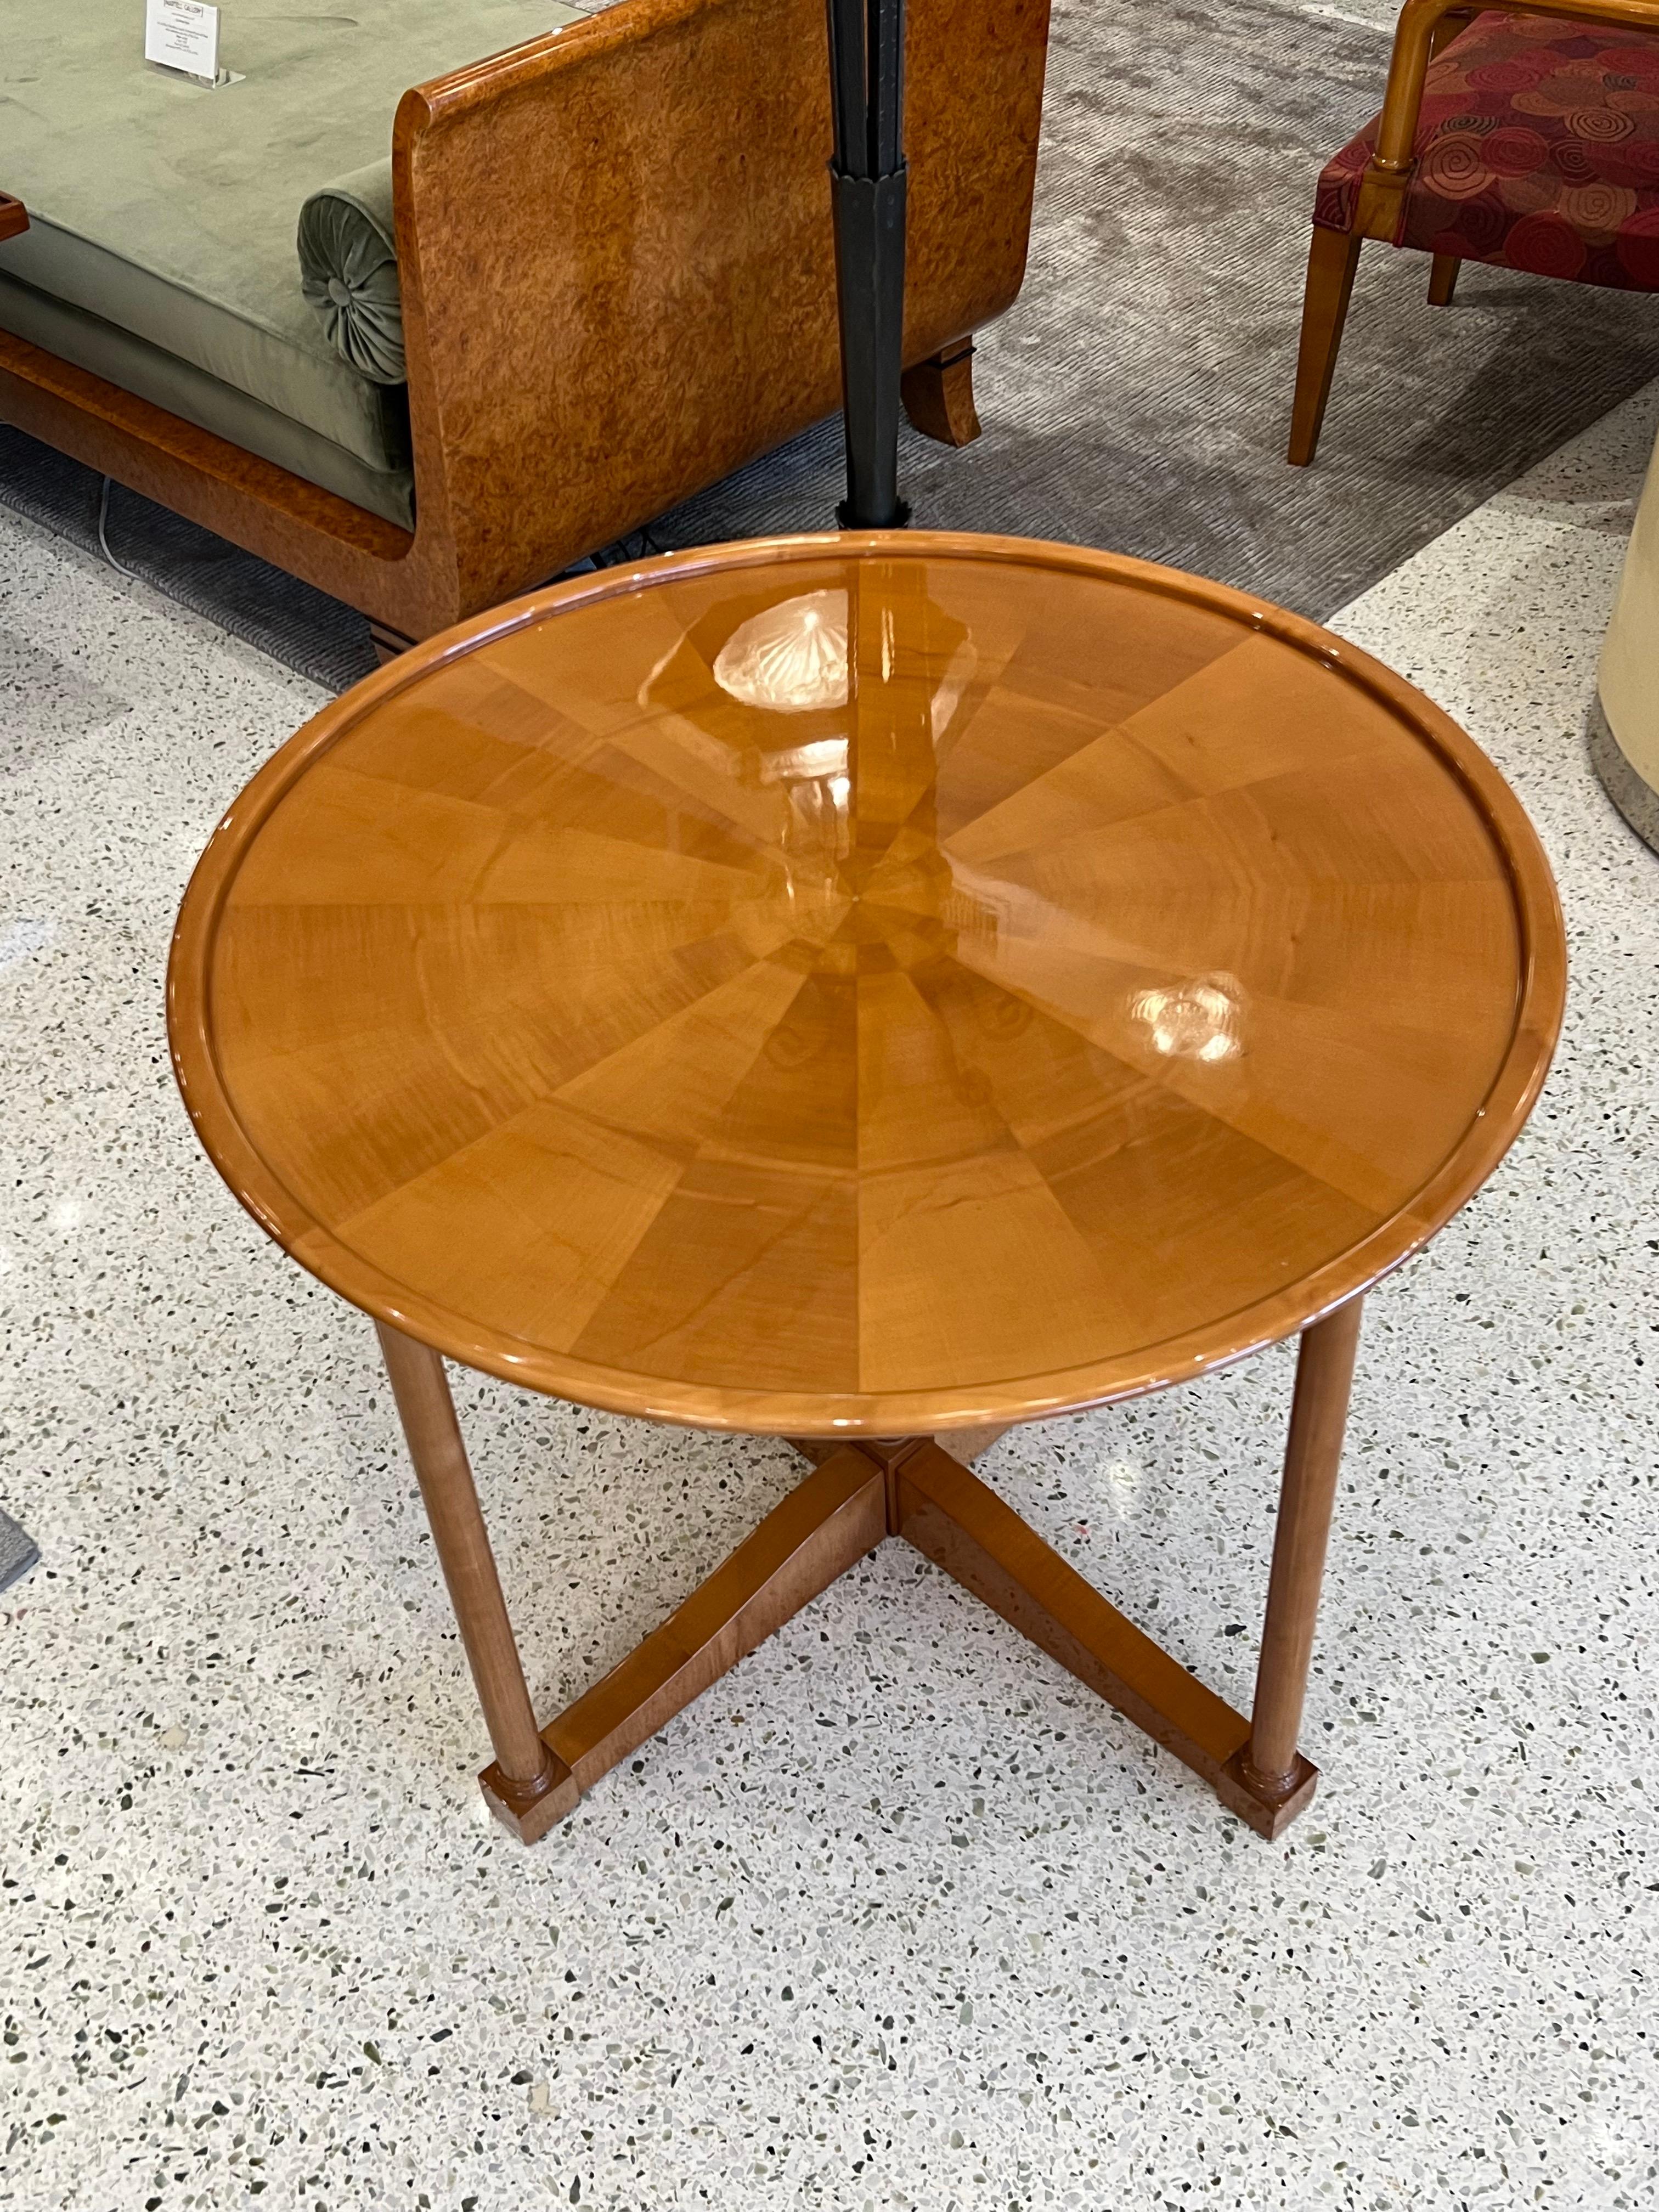 sycamore table